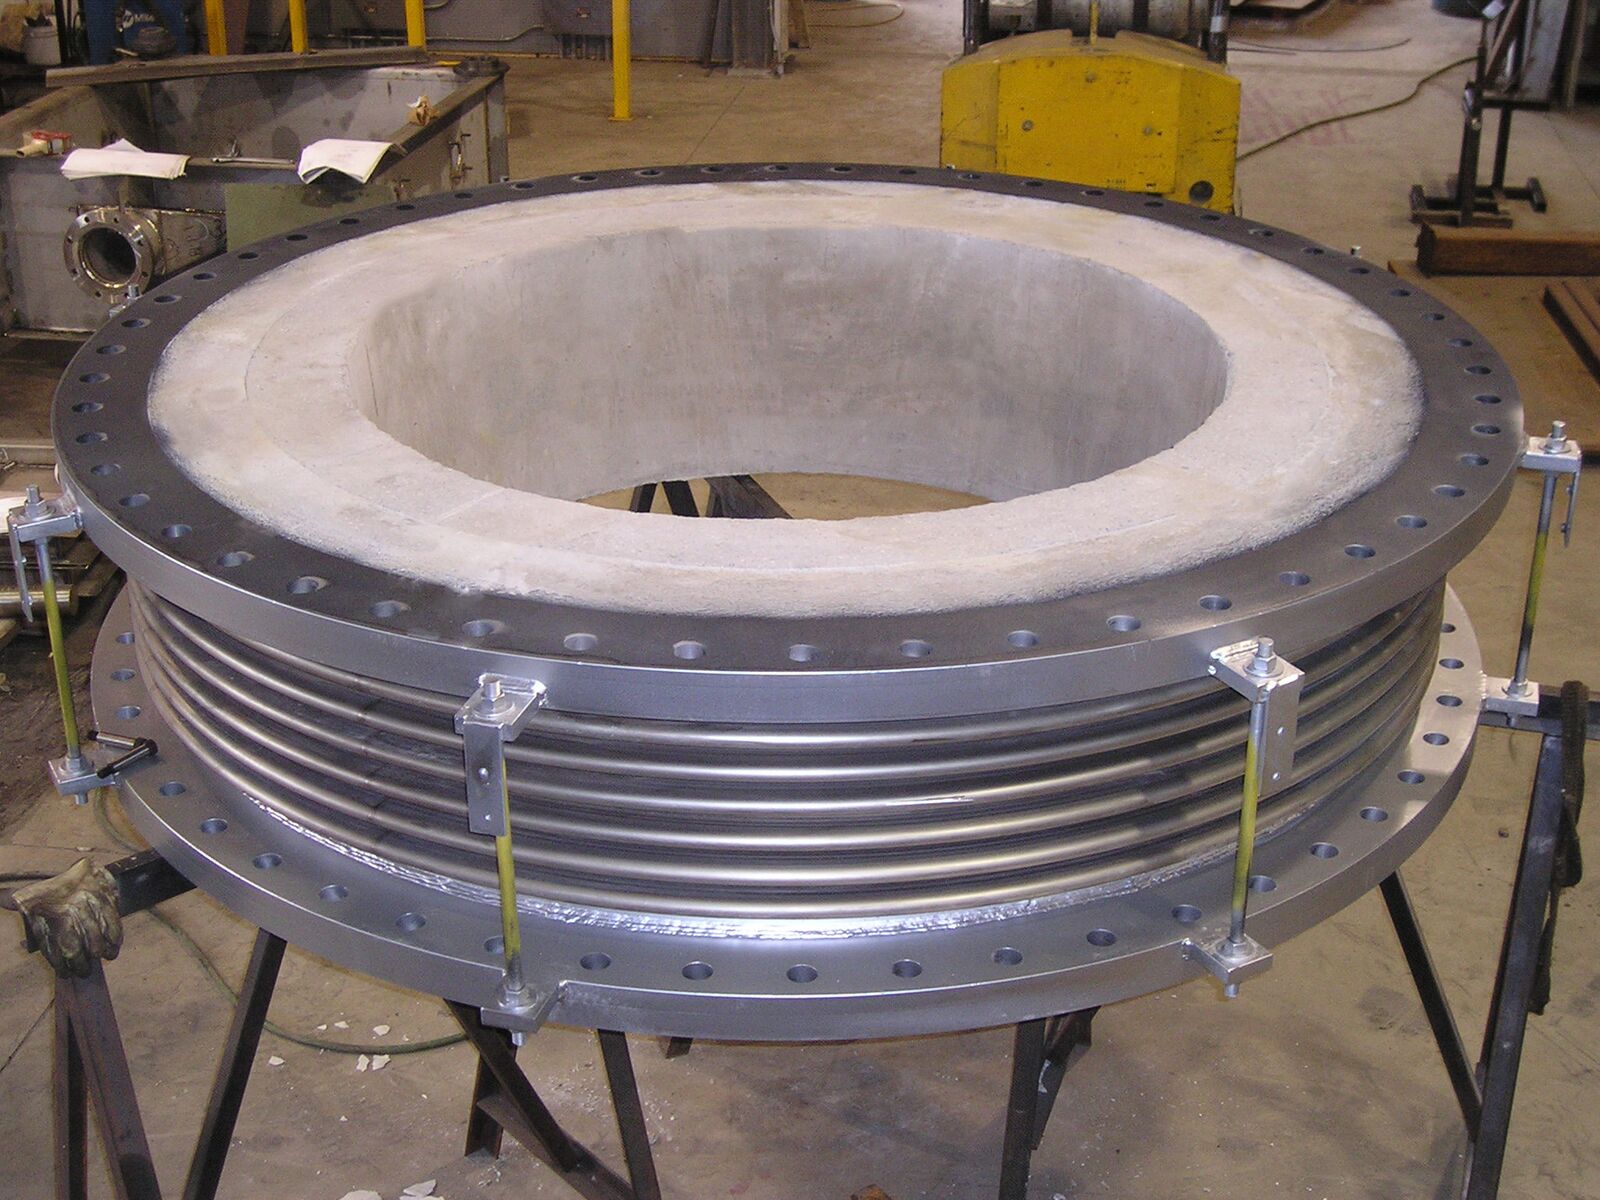 Damper and Expansion Joints